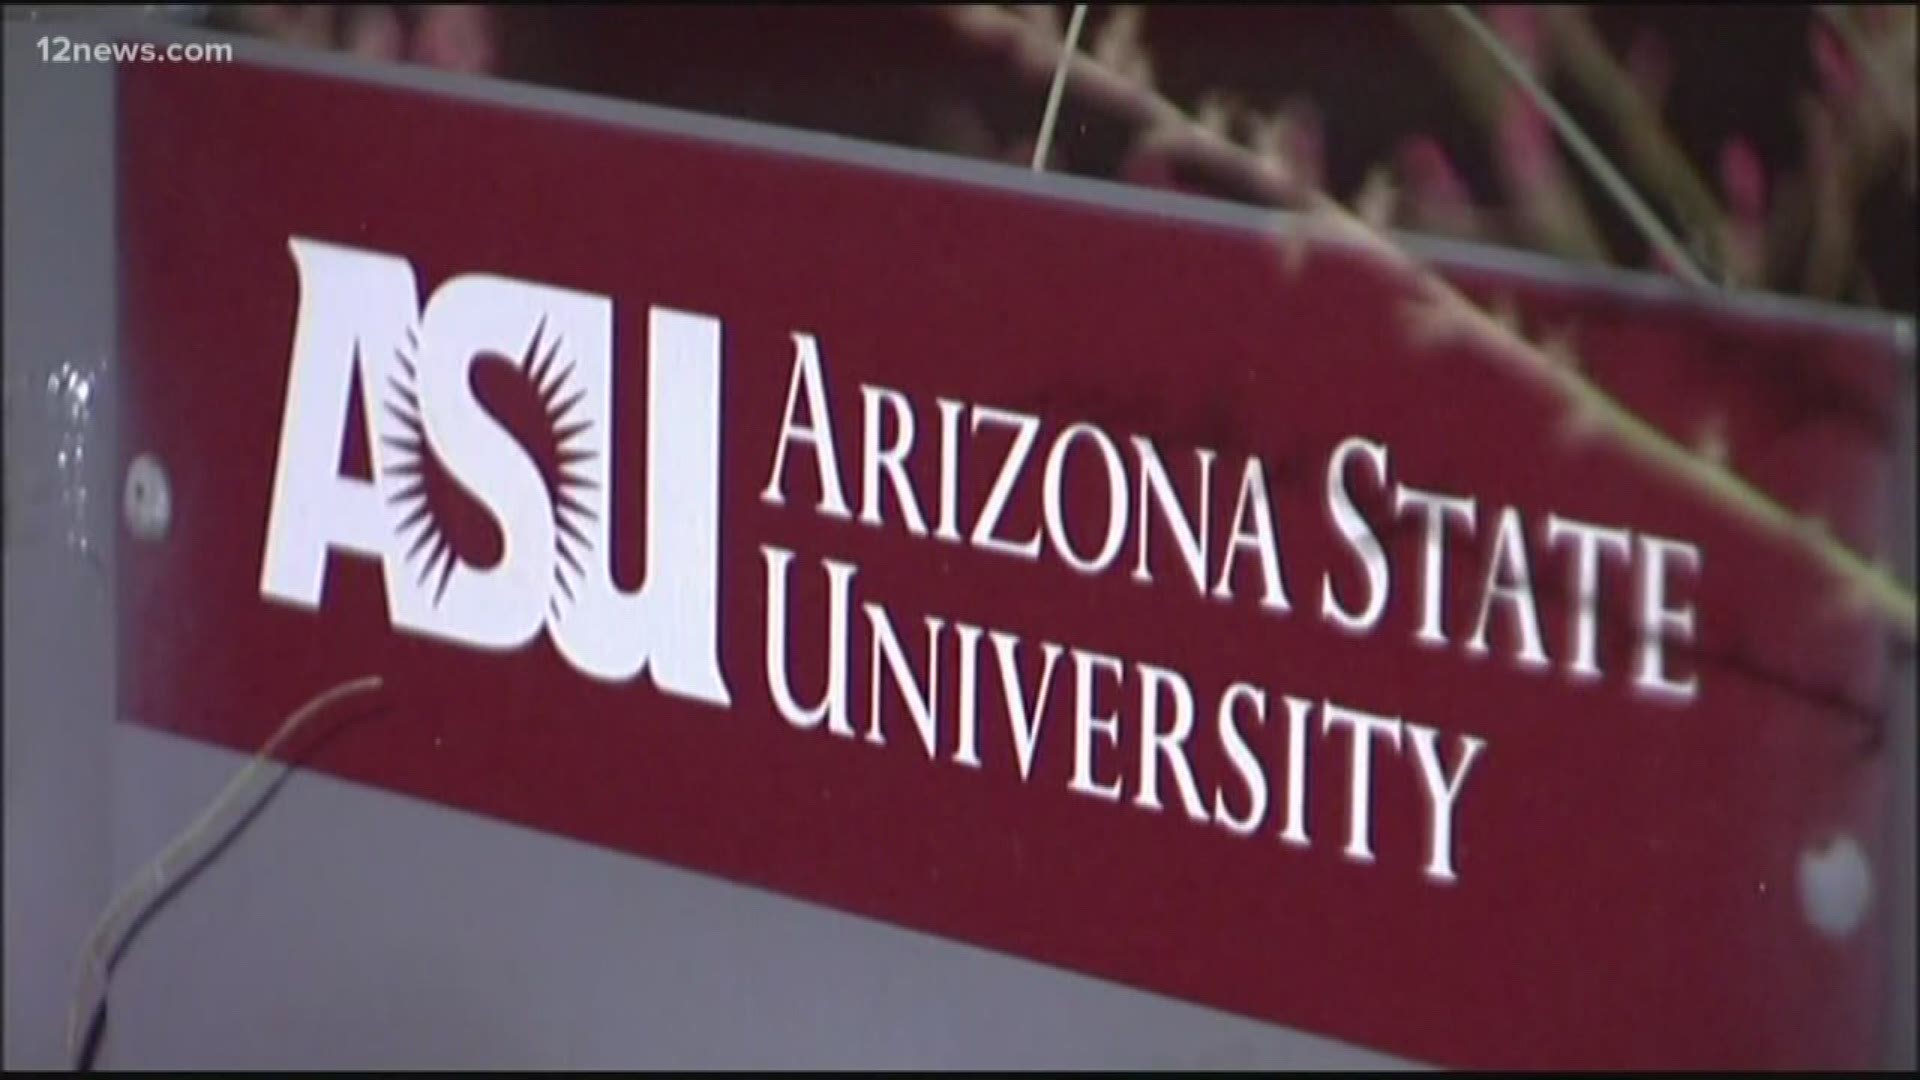 All in-person classes at ASU and UArizona are going online wherever possible starting at the beginning of the spring semester, the university announced.